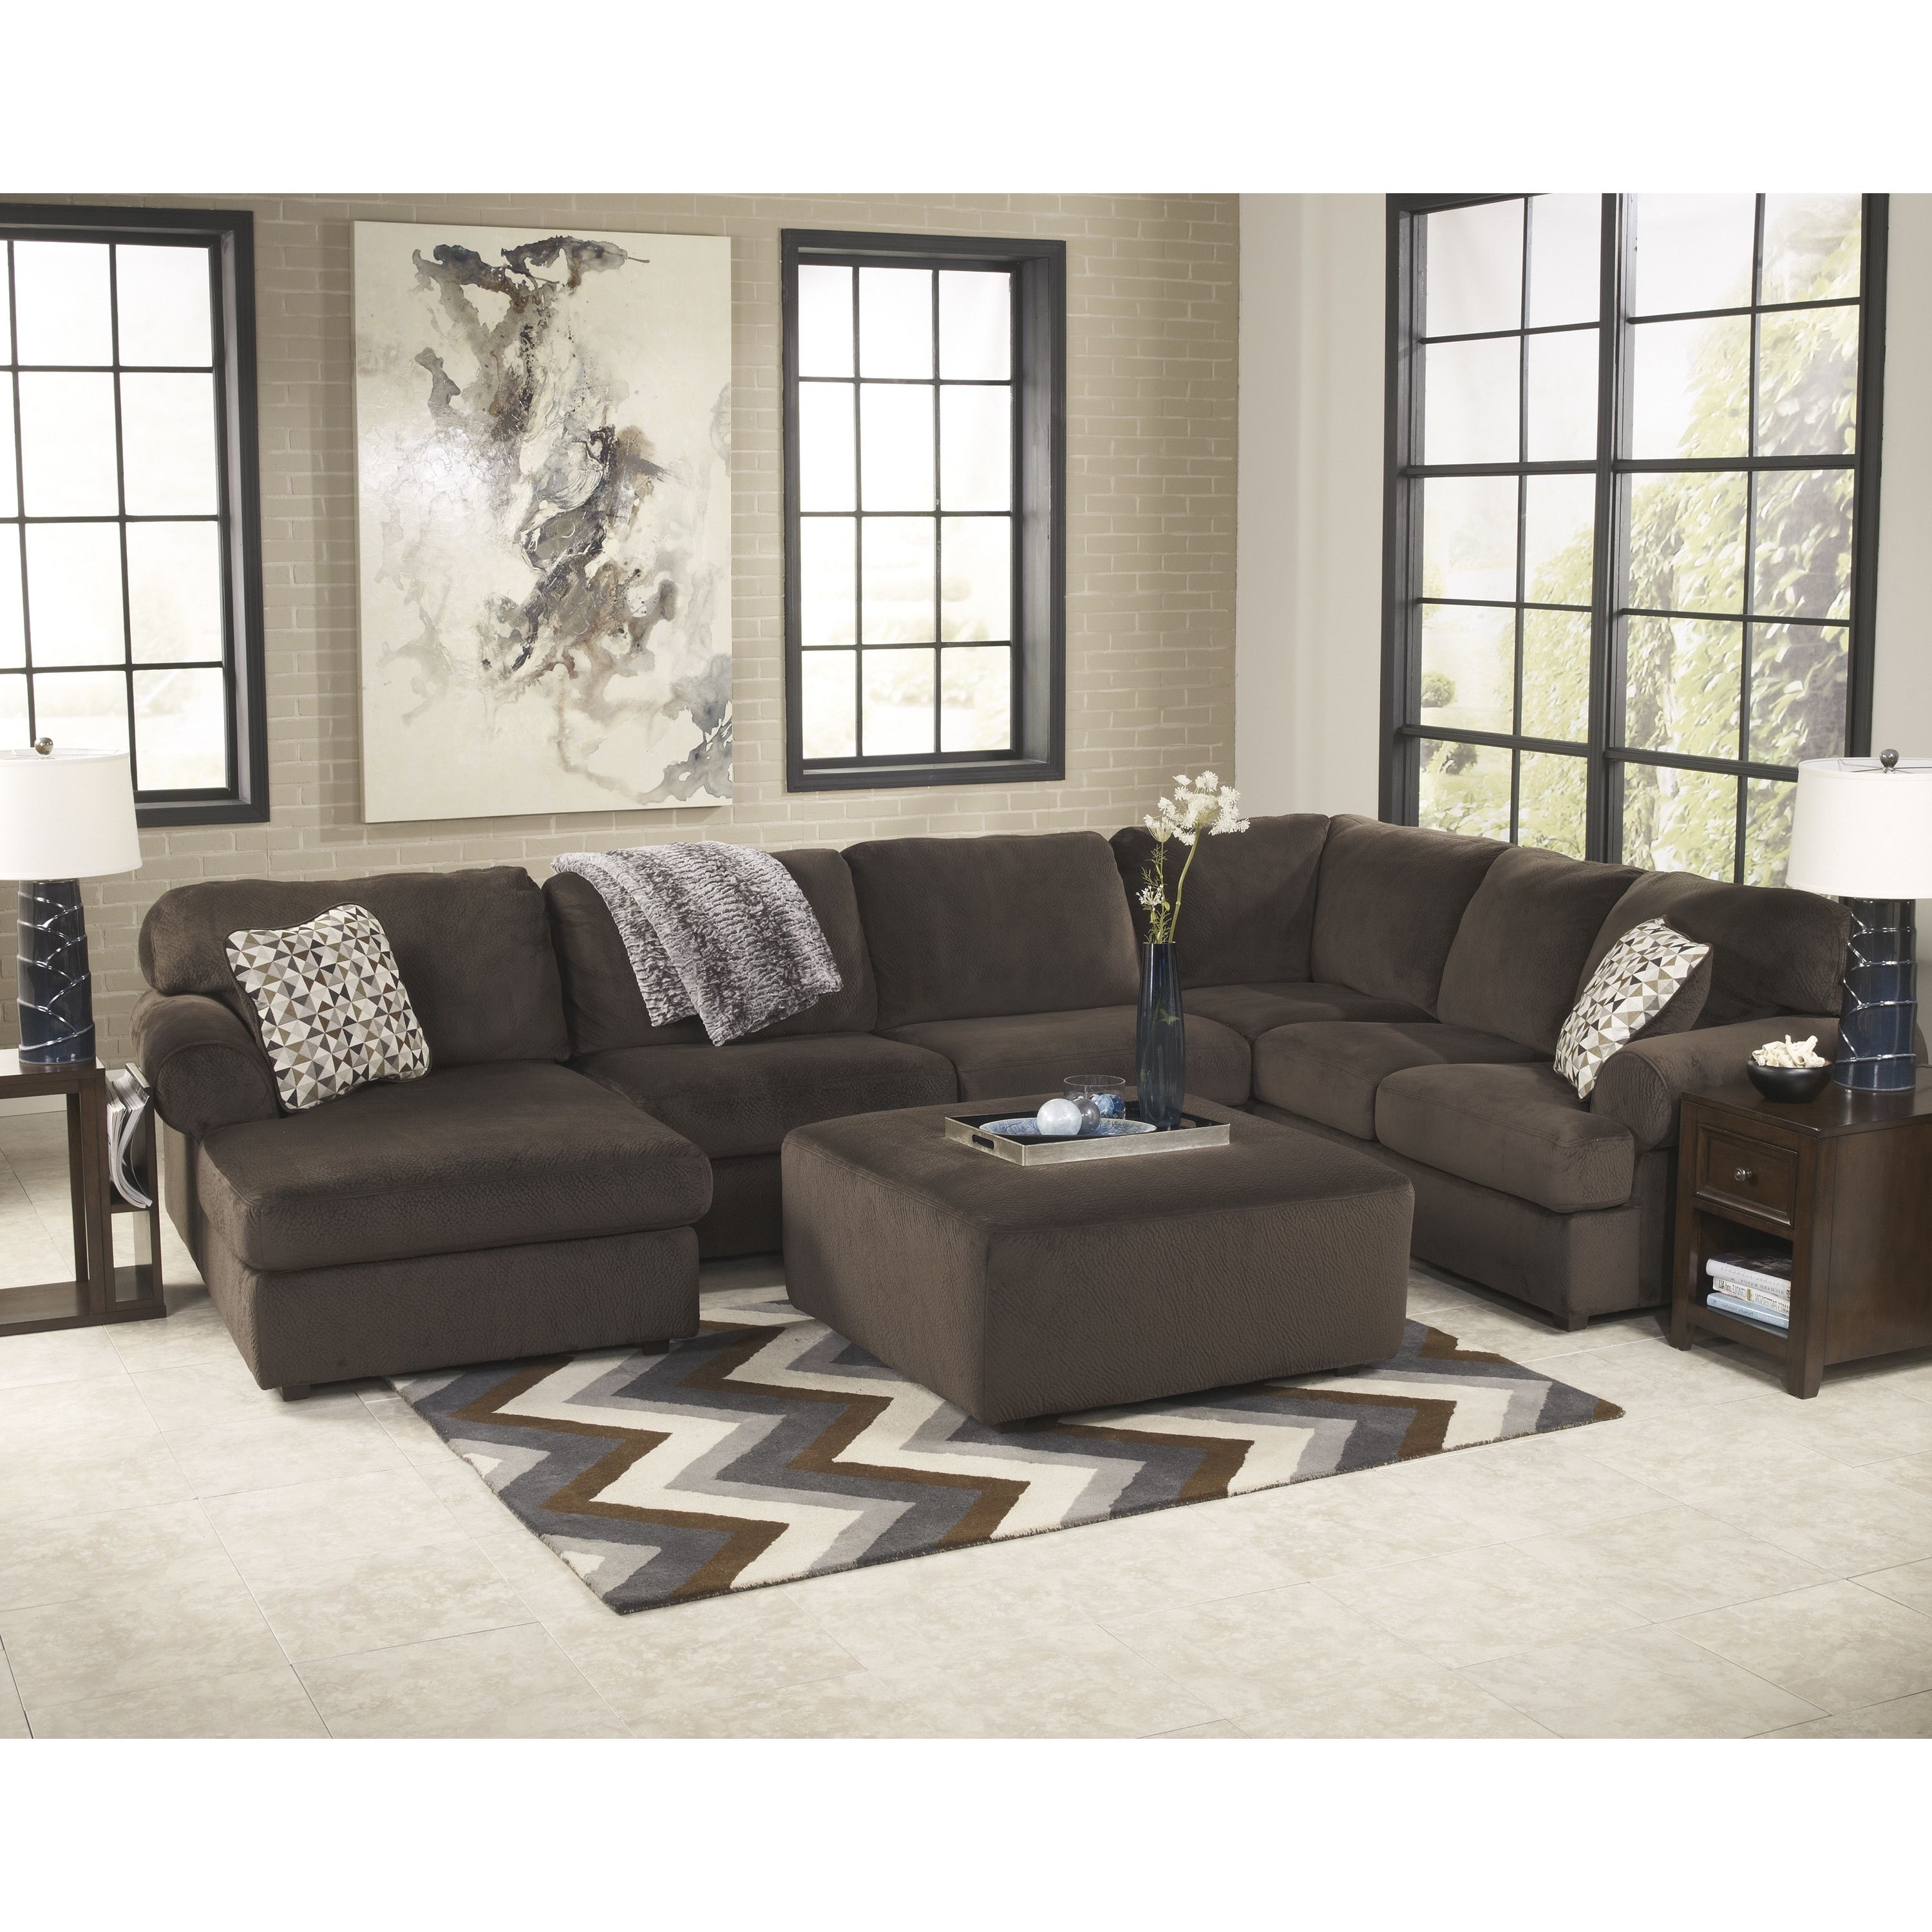 Free Wayfair Sectionals Furniture Using Pretty Cheap Sectional Sofas Intended For Wayfair Sectional Sofas (View 4 of 10)